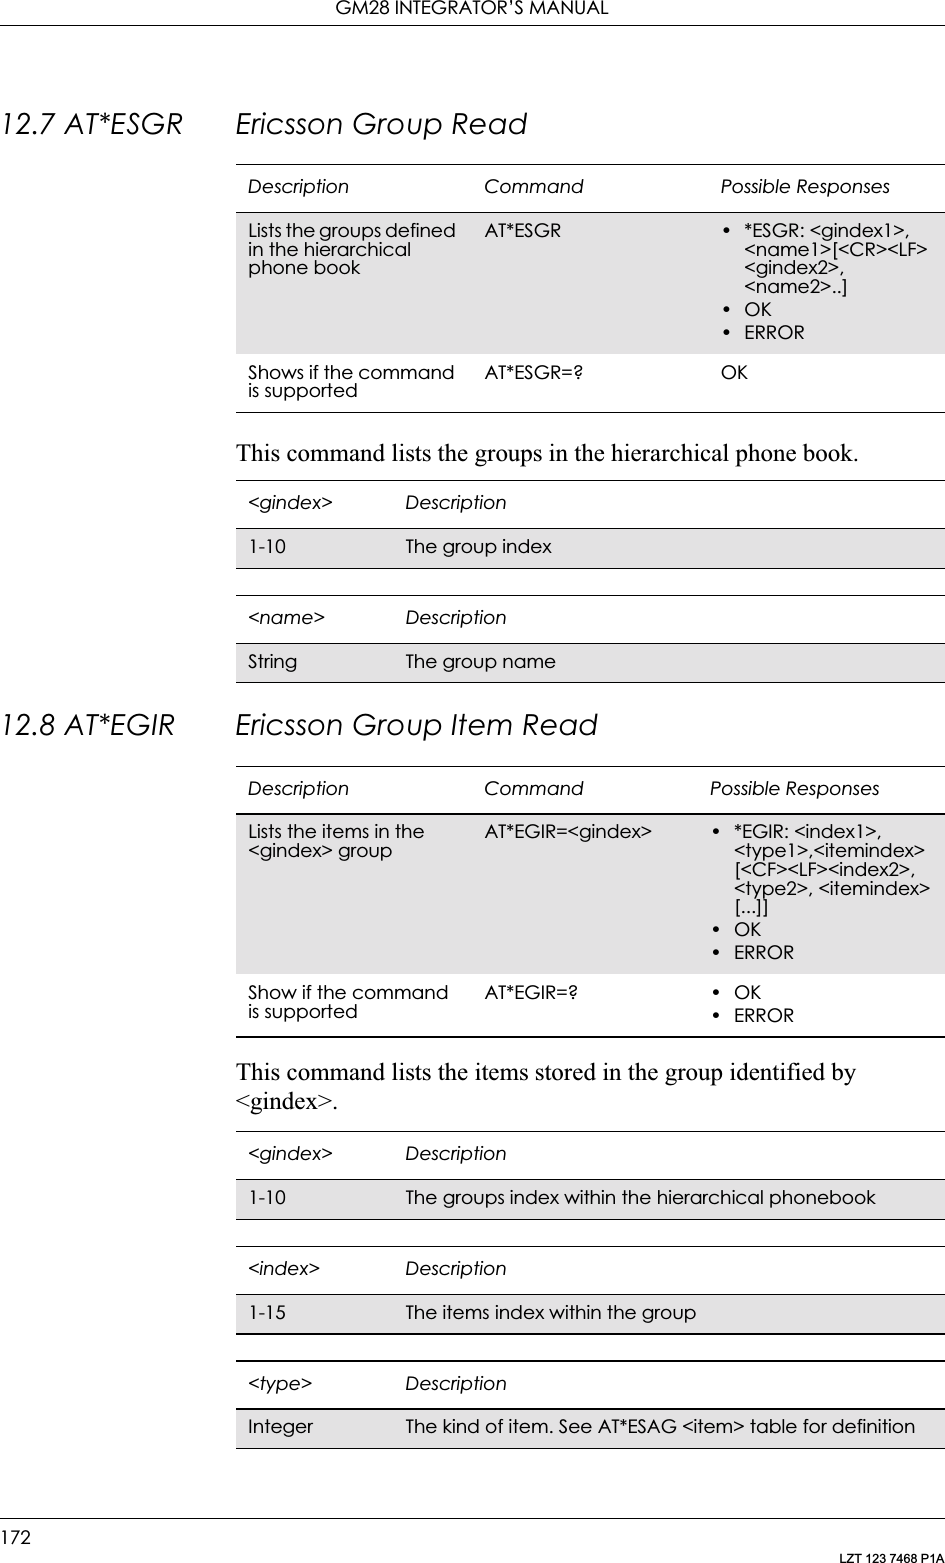 GM28 INTEGRATOR’S MANUAL172LZT 123 7468 P1A12.7 AT*ESGR Ericsson Group ReadThis command lists the groups in the hierarchical phone book.12.8 AT*EGIR Ericsson Group Item ReadThis command lists the items stored in the group identified by &lt;gindex&gt;.Description Command Possible ResponsesLists the groups defined in the hierarchical phone bookAT*ESGR • *ESGR: &lt;gindex1&gt;, &lt;name1&gt;[&lt;CR&gt;&lt;LF&gt; &lt;gindex2&gt;, &lt;name2&gt;..]•OK•ERRORShows if the command is supportedAT*ESGR=? OK&lt;gindex&gt; Description1-10 The group index&lt;name&gt; DescriptionString The group nameDescription Command Possible ResponsesLists the items in the &lt;gindex&gt; groupAT*EGIR=&lt;gindex&gt; • *EGIR: &lt;index1&gt;, &lt;type1&gt;,&lt;itemindex&gt; [&lt;CF&gt;&lt;LF&gt;&lt;index2&gt;, &lt;type2&gt;, &lt;itemindex&gt;[...]]•OK•ERRORShow if the command is supportedAT*EGIR=? • OK•ERROR&lt;gindex&gt; Description1-10 The groups index within the hierarchical phonebook&lt;index&gt; Description1-15 The items index within the group&lt;type&gt; DescriptionInteger The kind of item. See AT*ESAG &lt;item&gt; table for definition